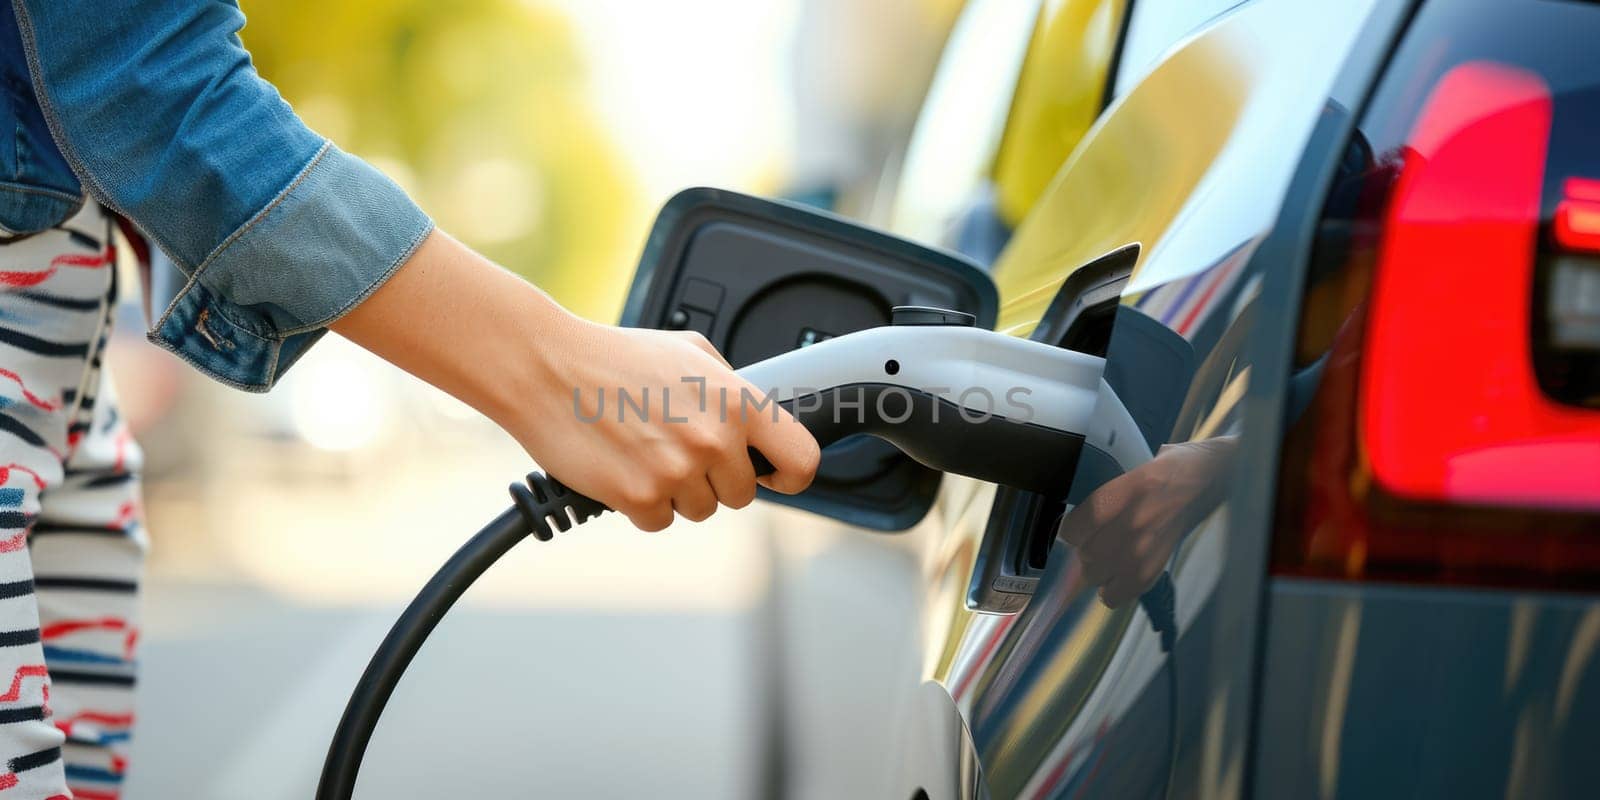 Young woman plugs charging gun in her electric car comeliness by biancoblue